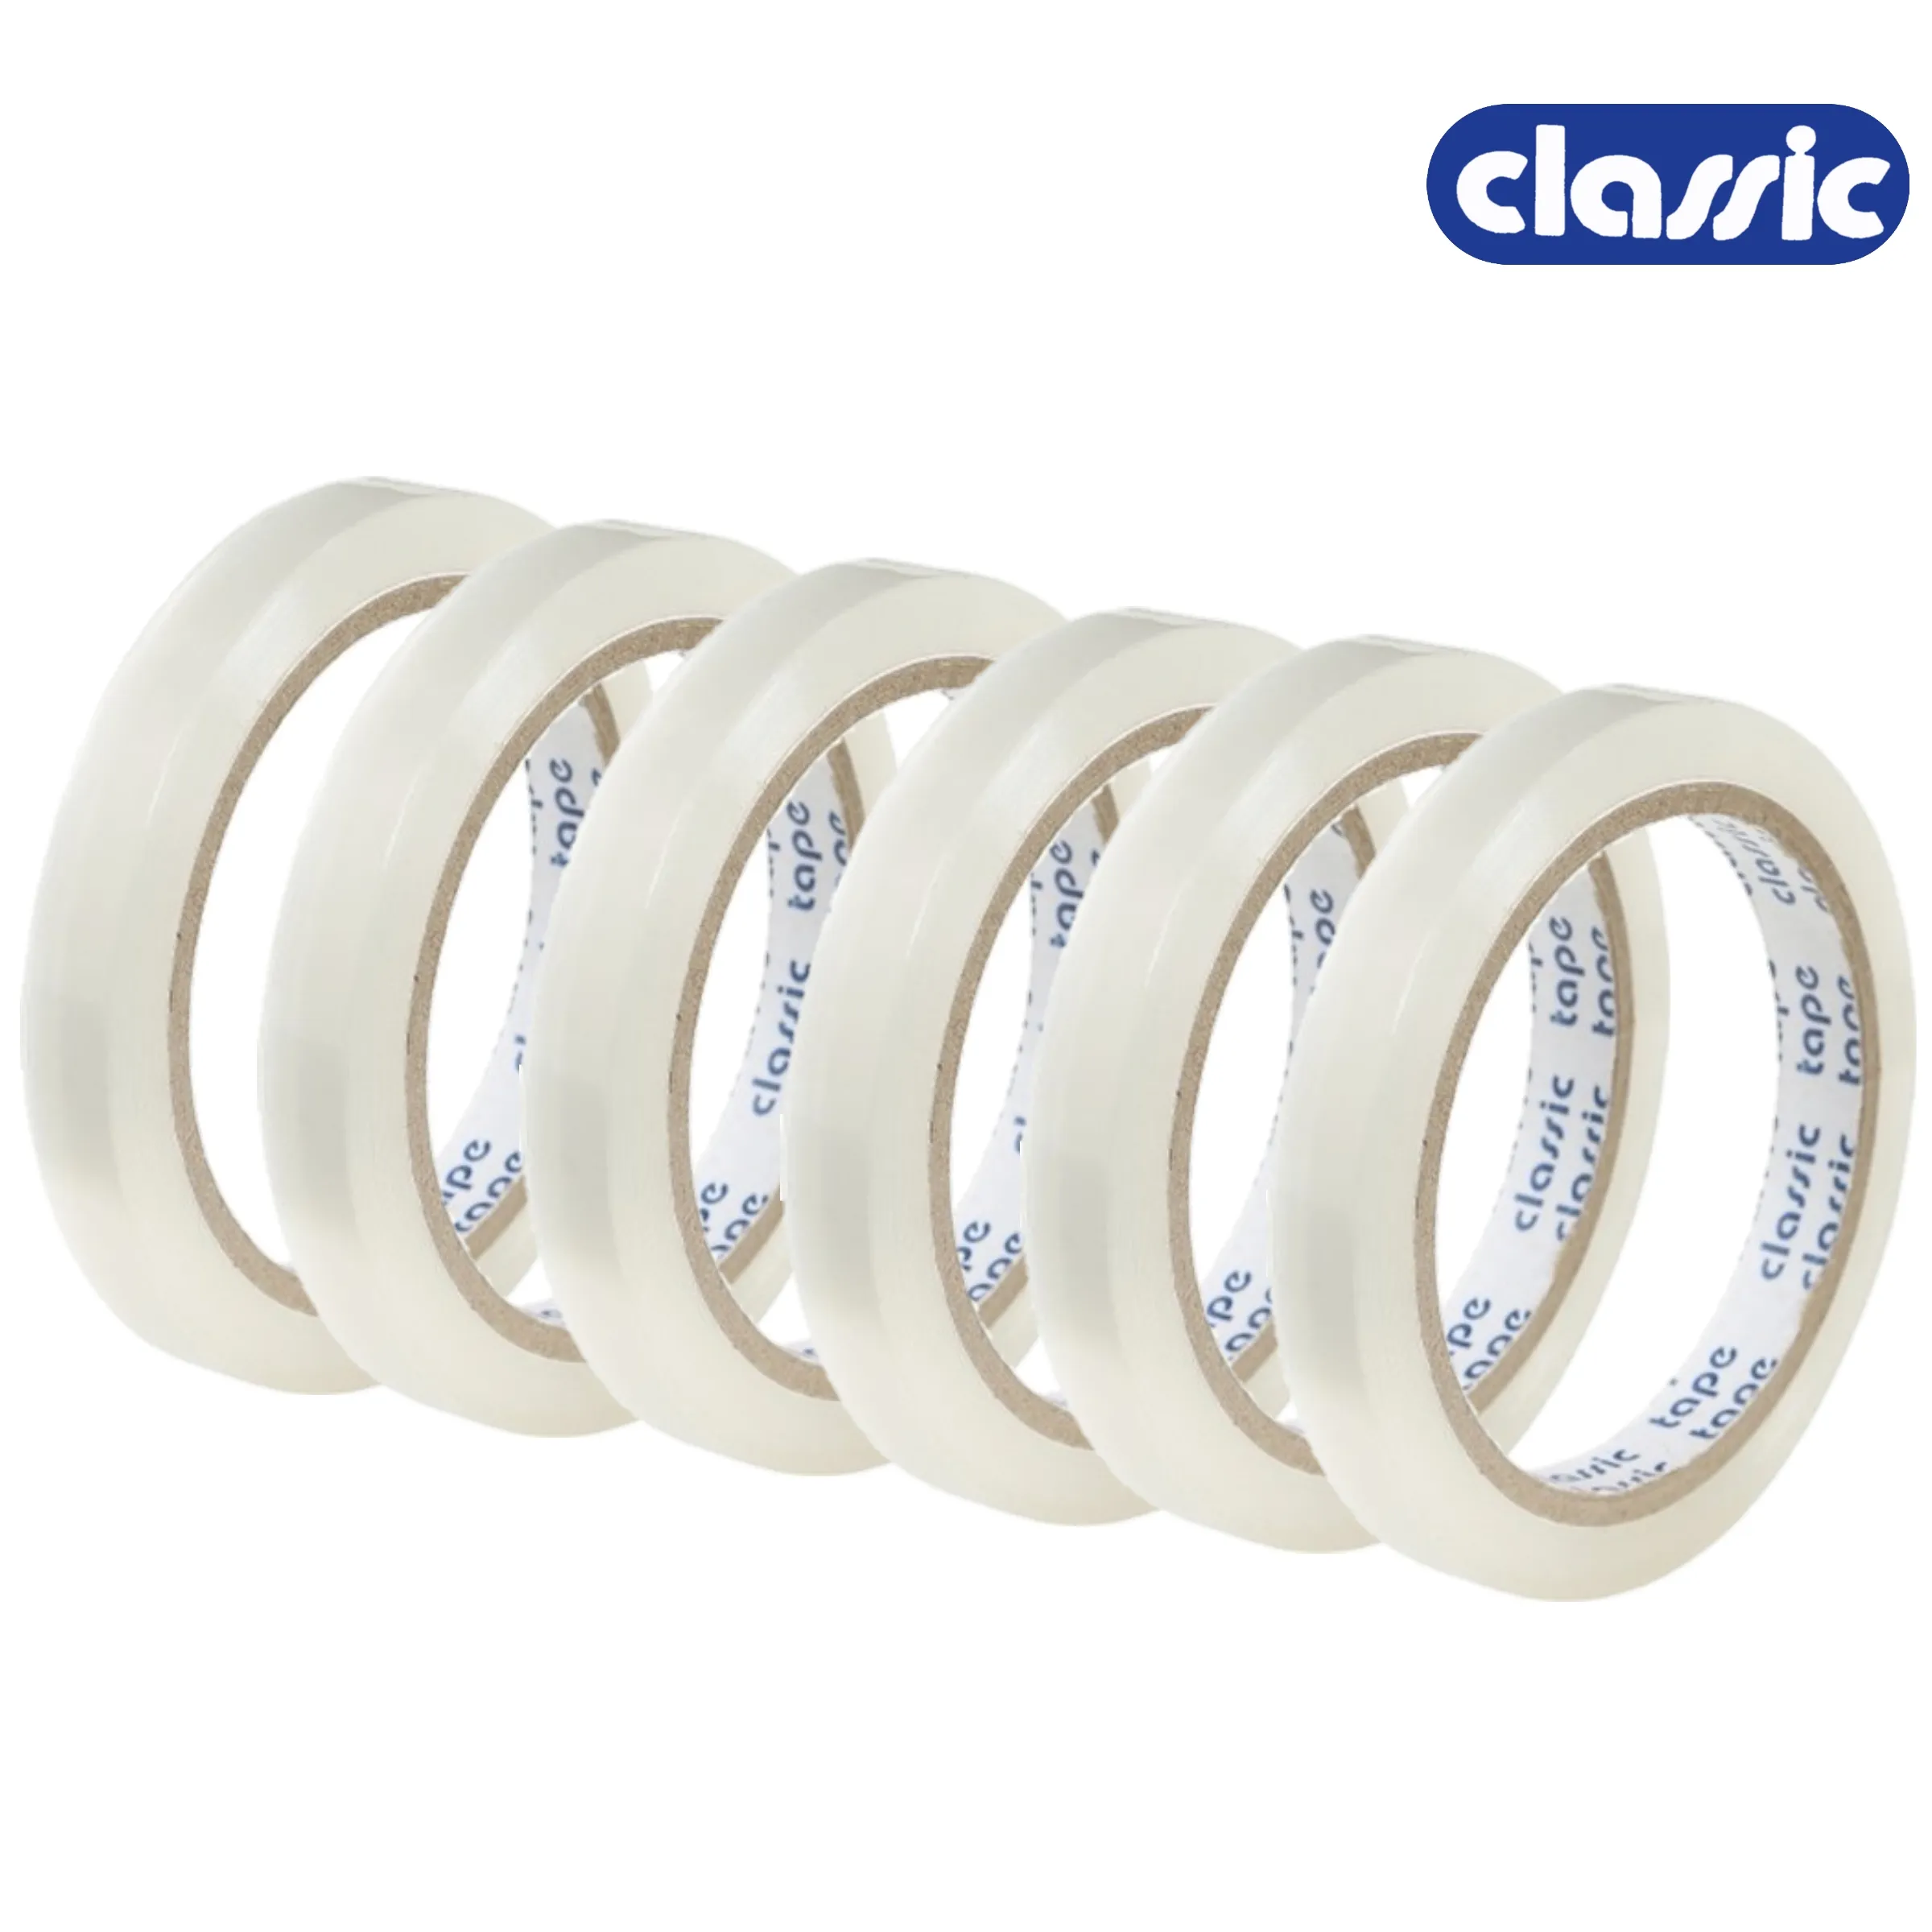 Classic 30 Micron 12 mm Transparent Self Adhesive Tape, Premium Quality, 1 Pack of 6 Roll